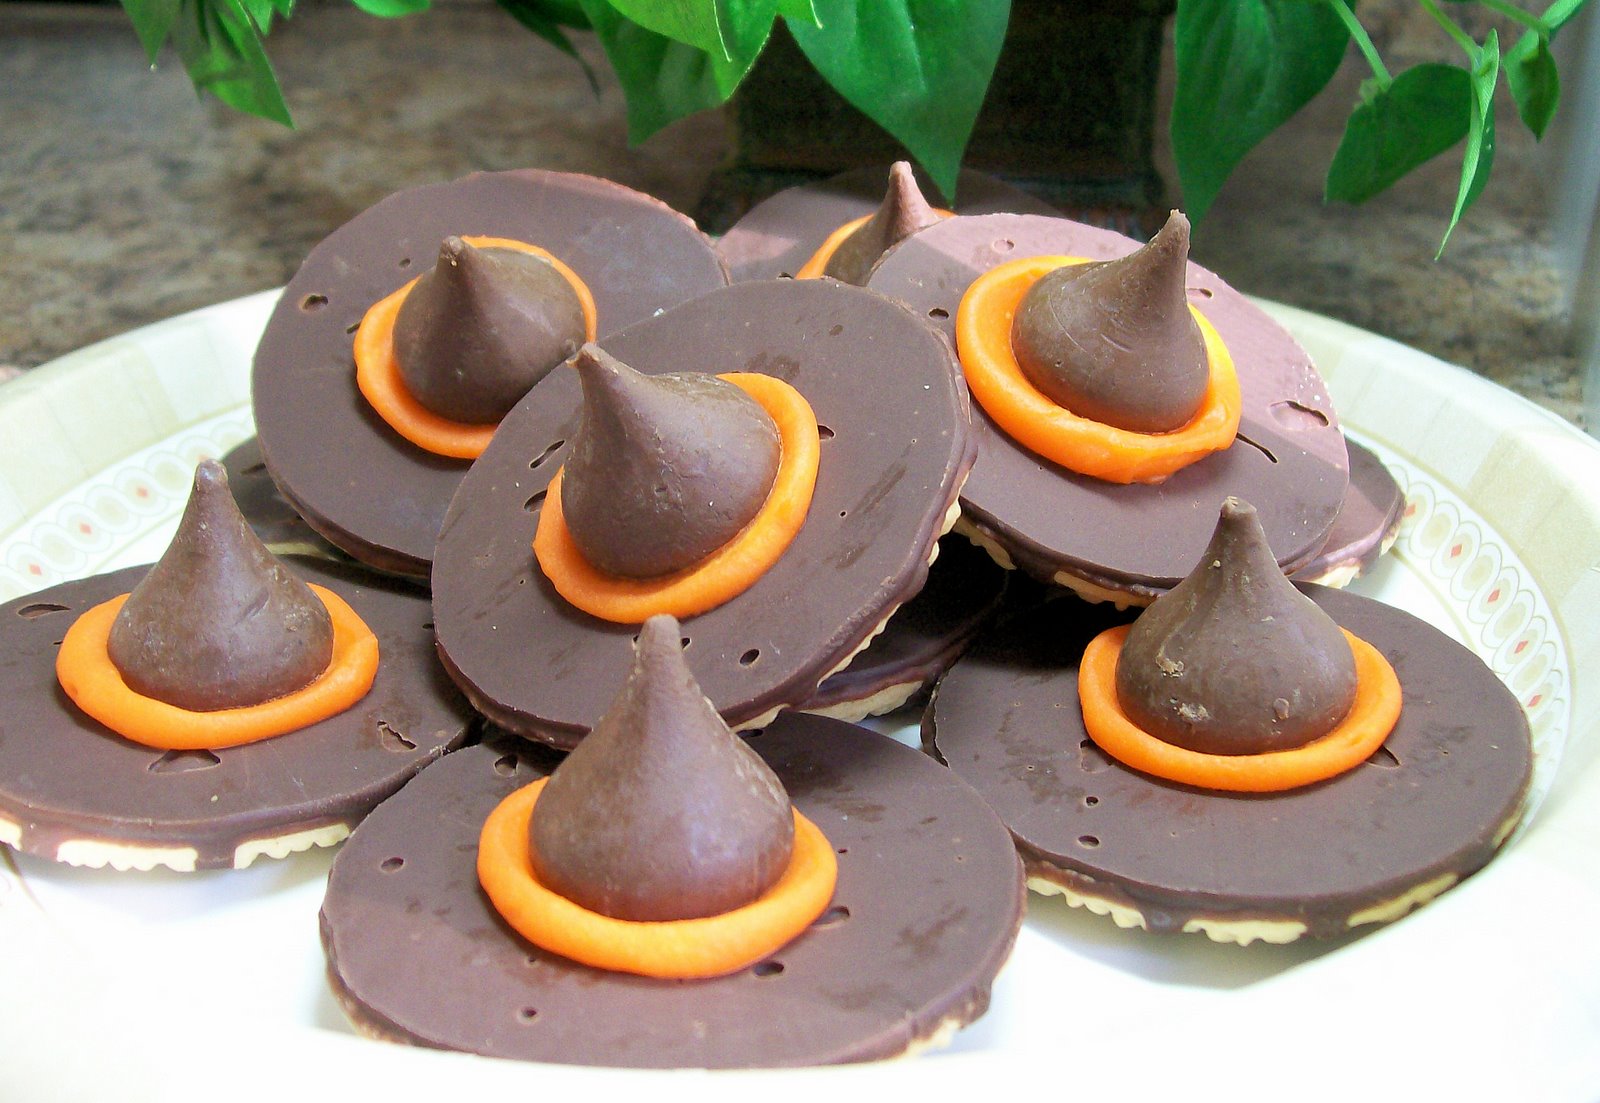 6. Which hat cookies